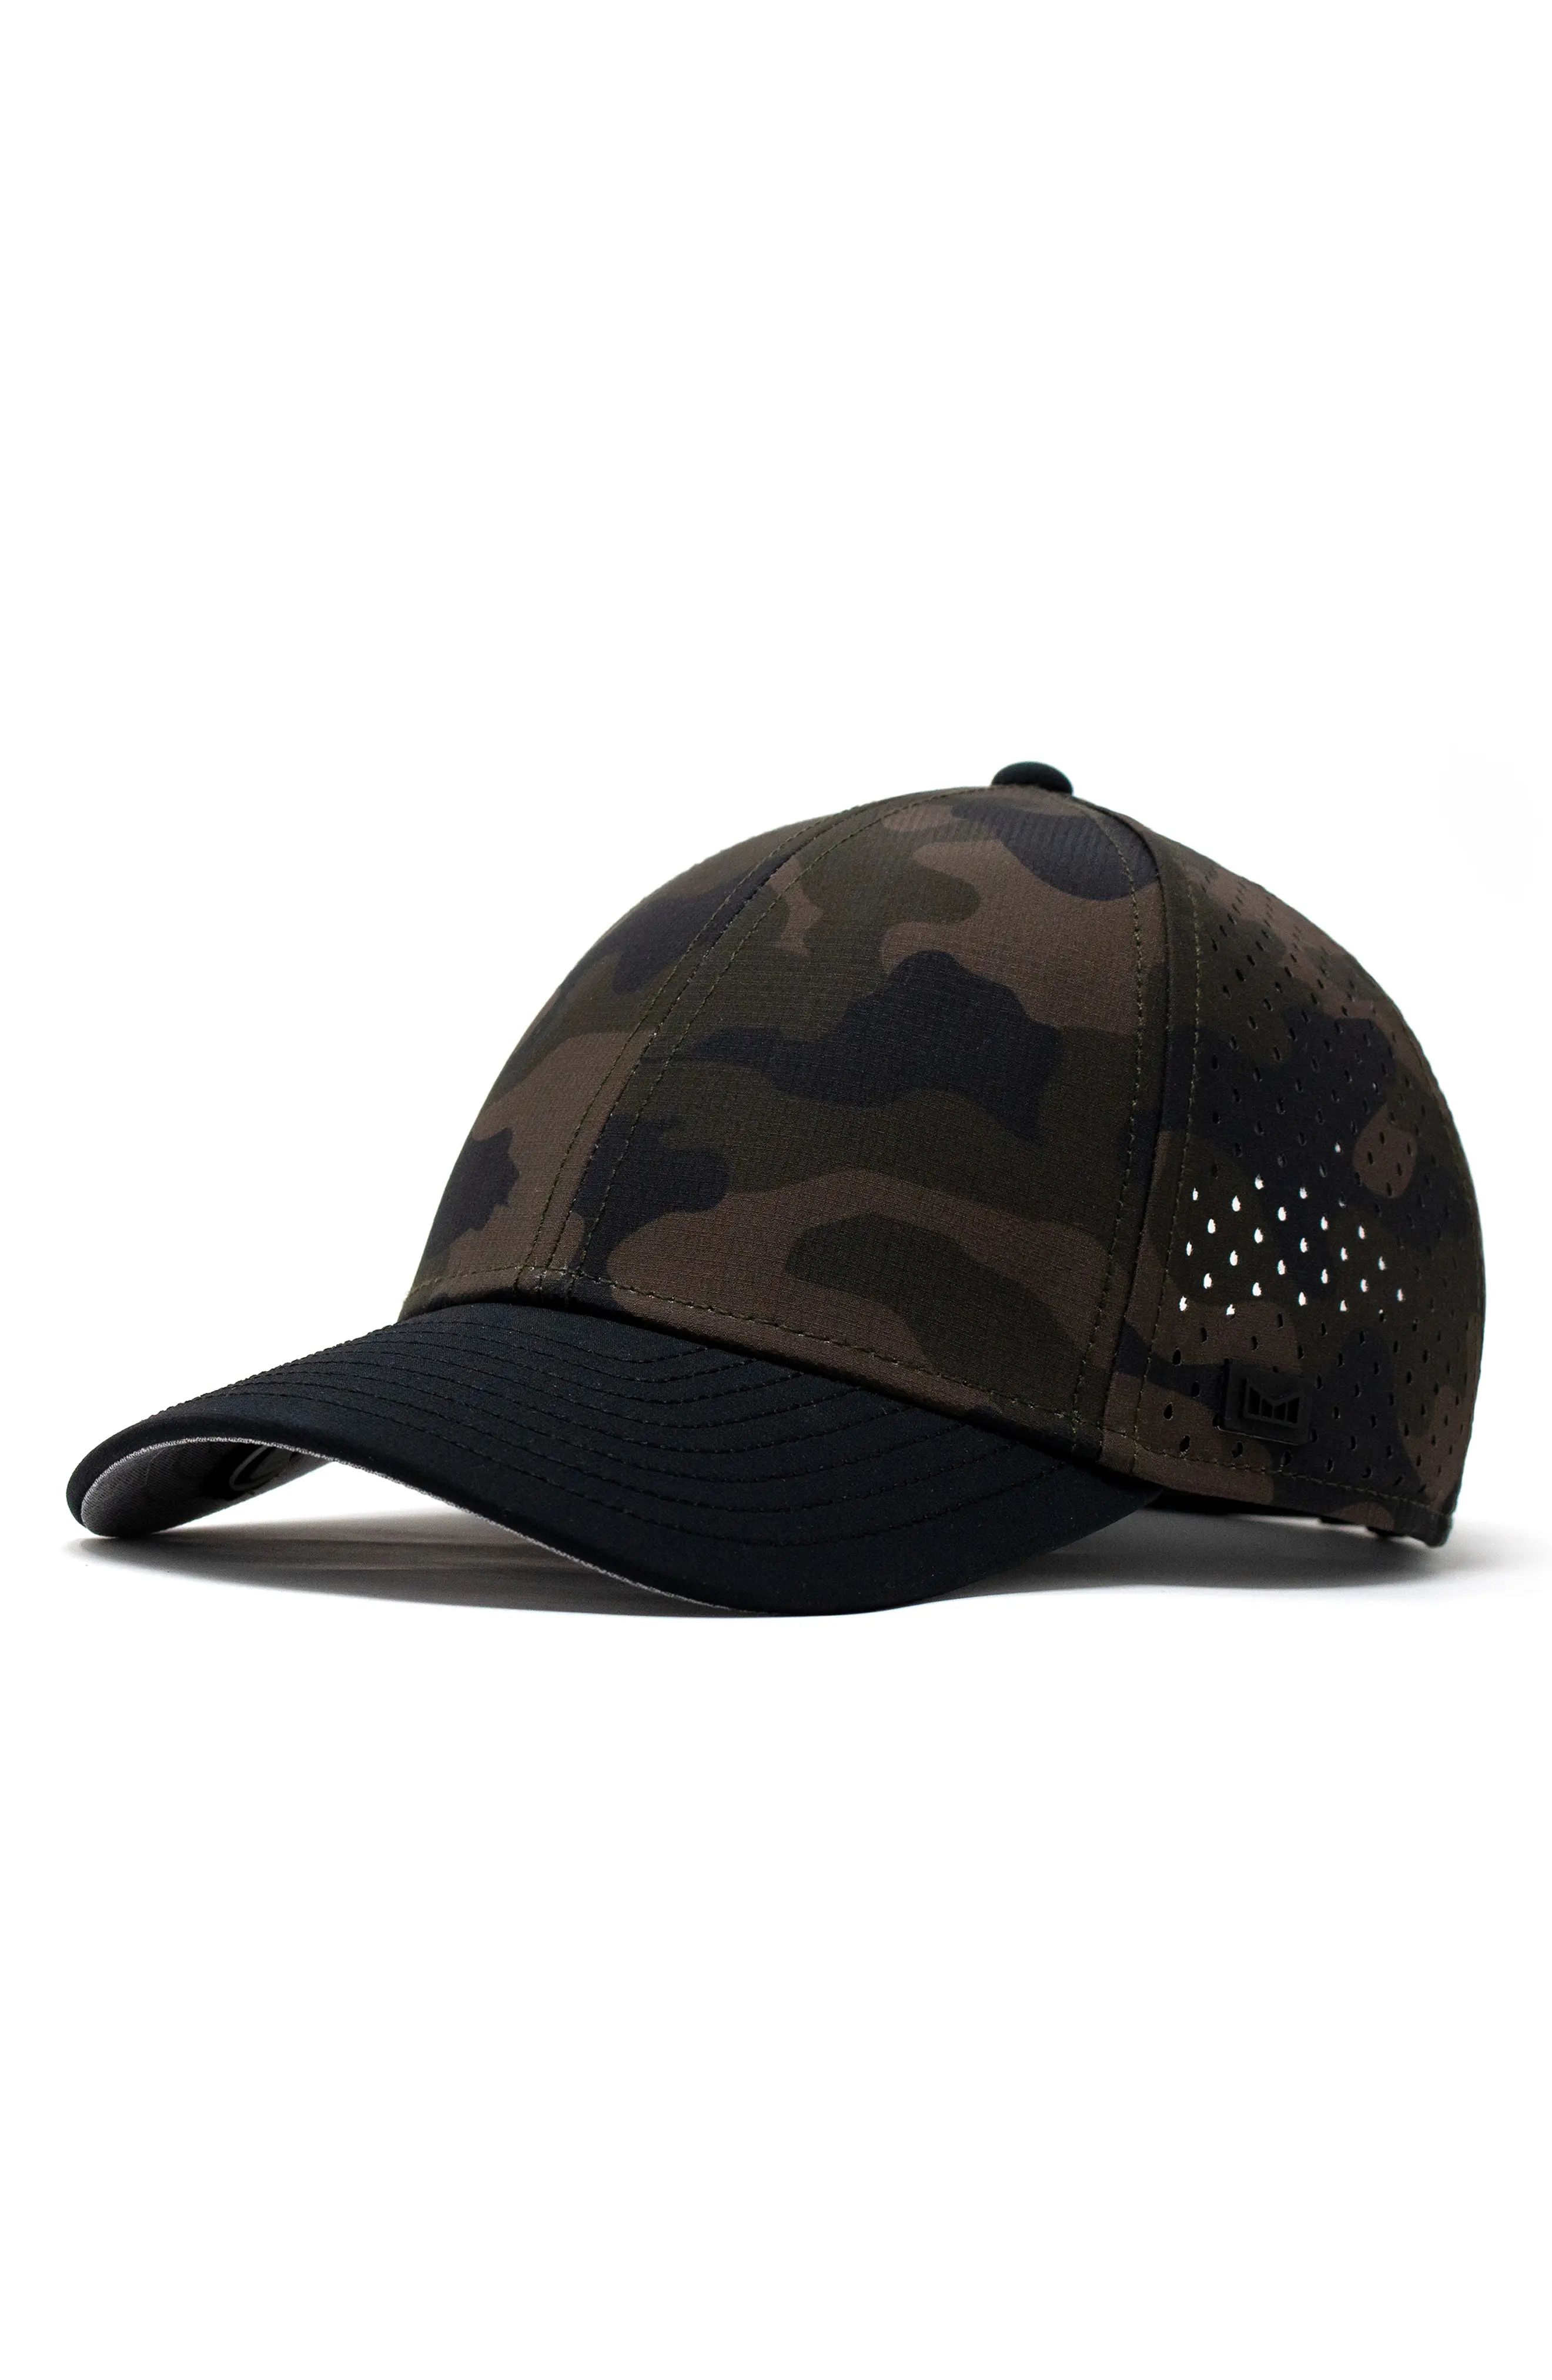 Melin Hydro A-Game Snapback Baseball Cap in Olive Camo at Nordstrom | Nordstrom